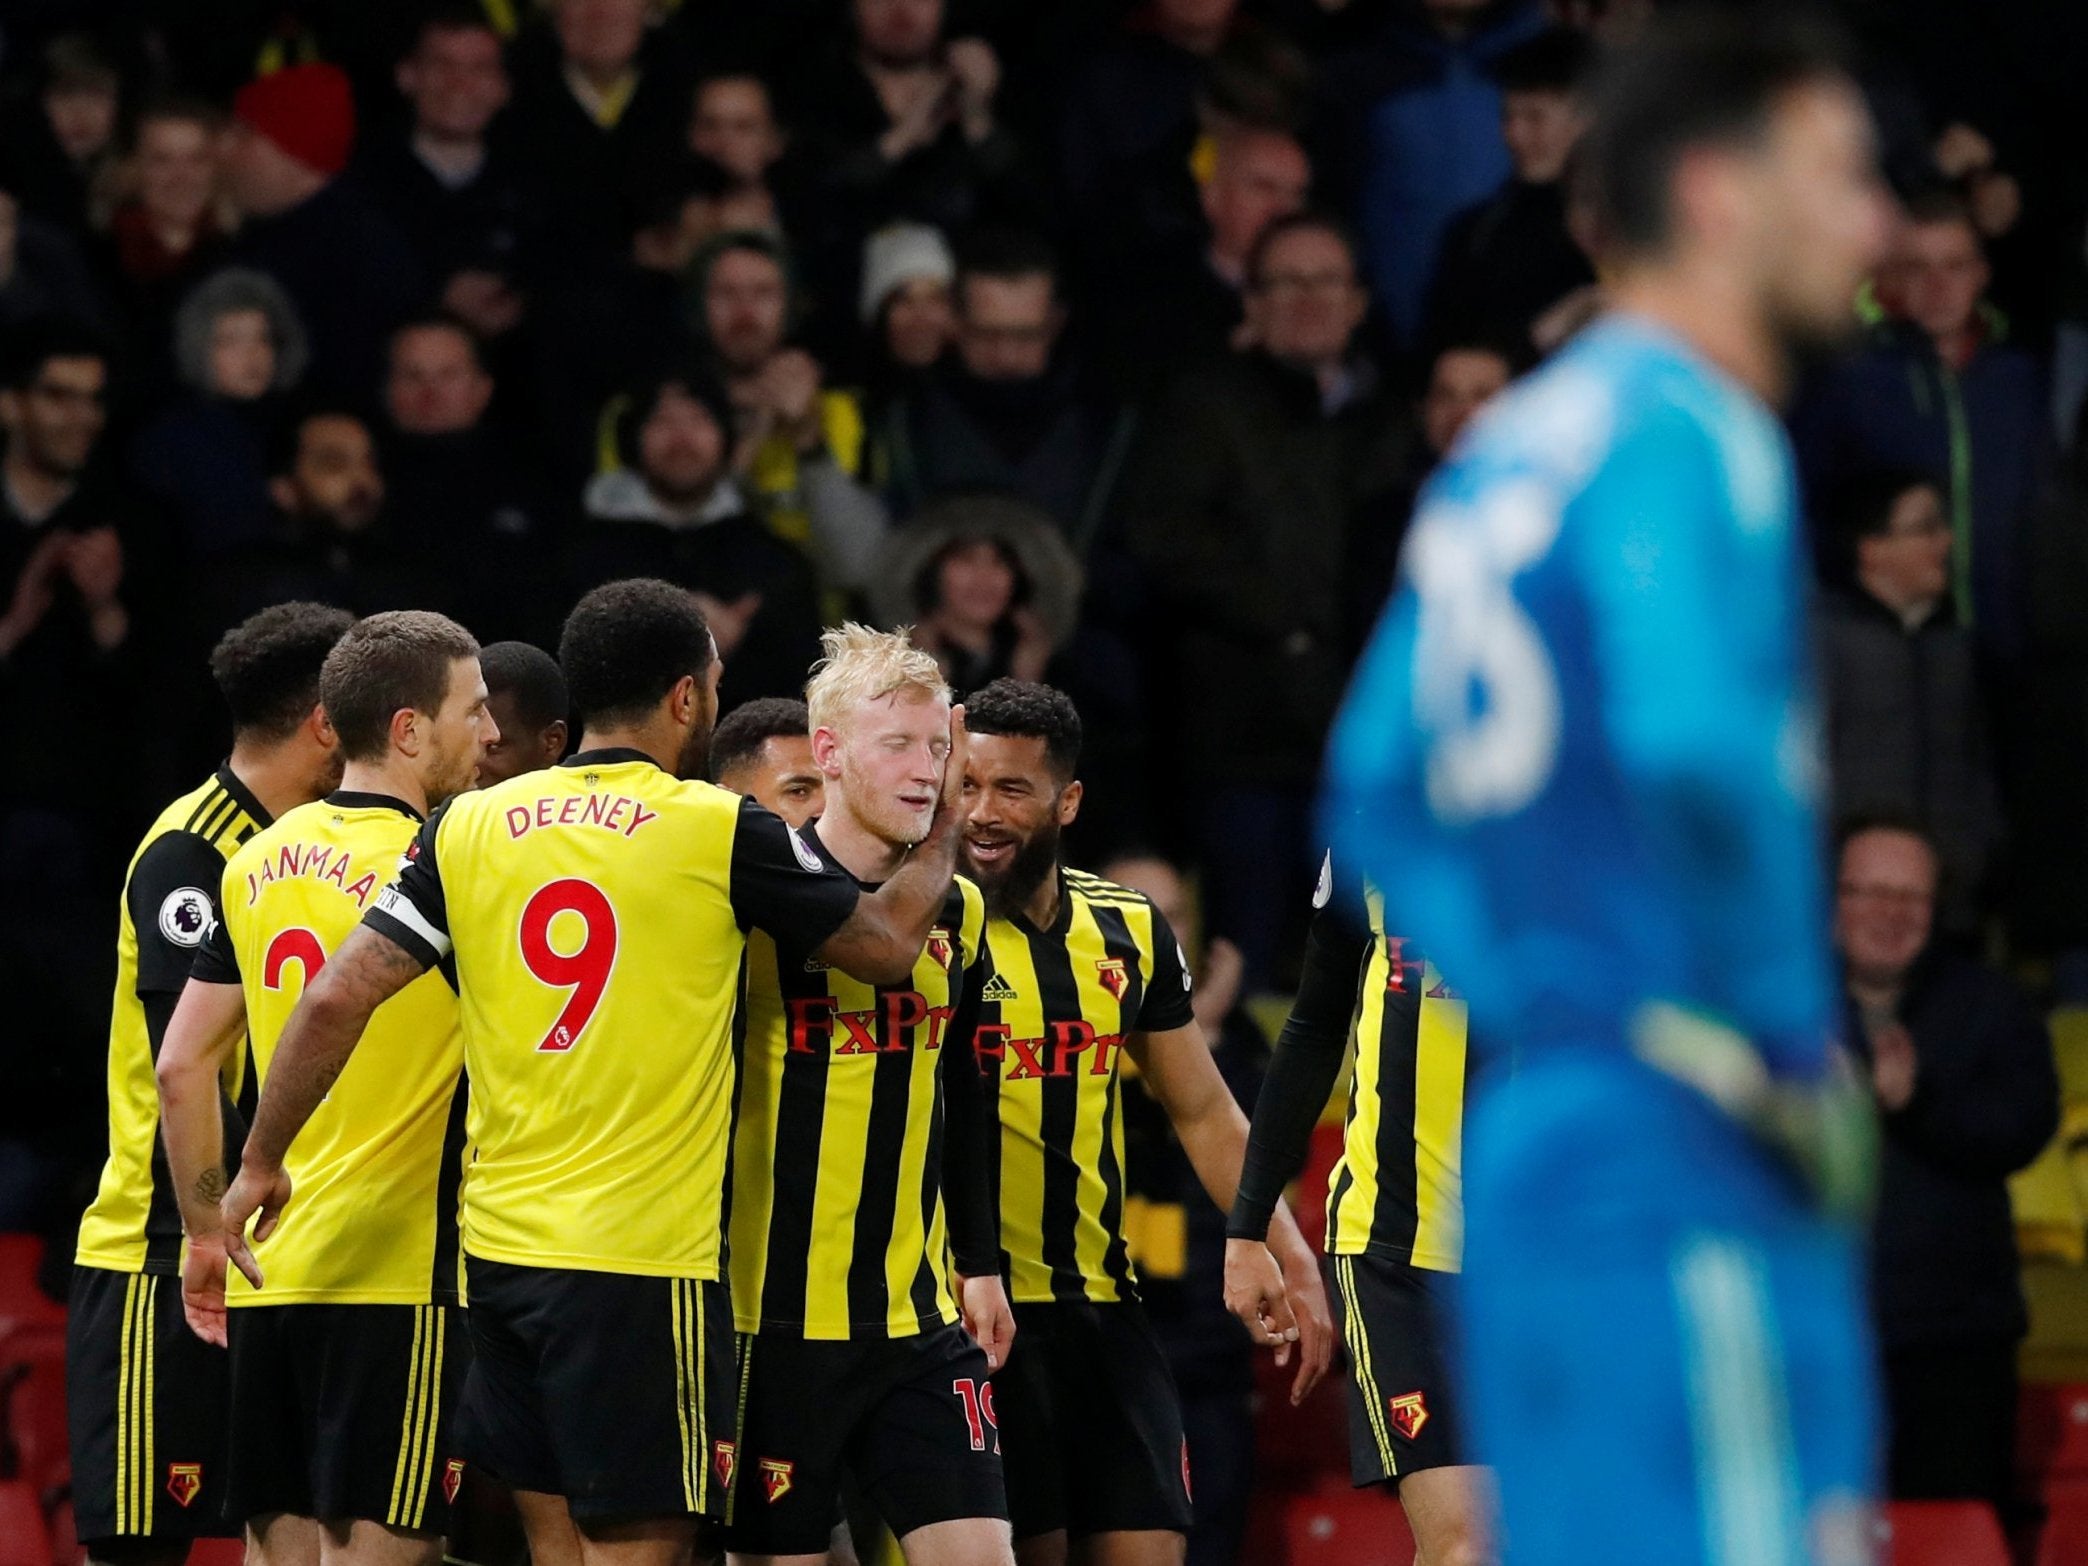 Watford are in fine form having beaten Manchester United and Fulham back-to-back